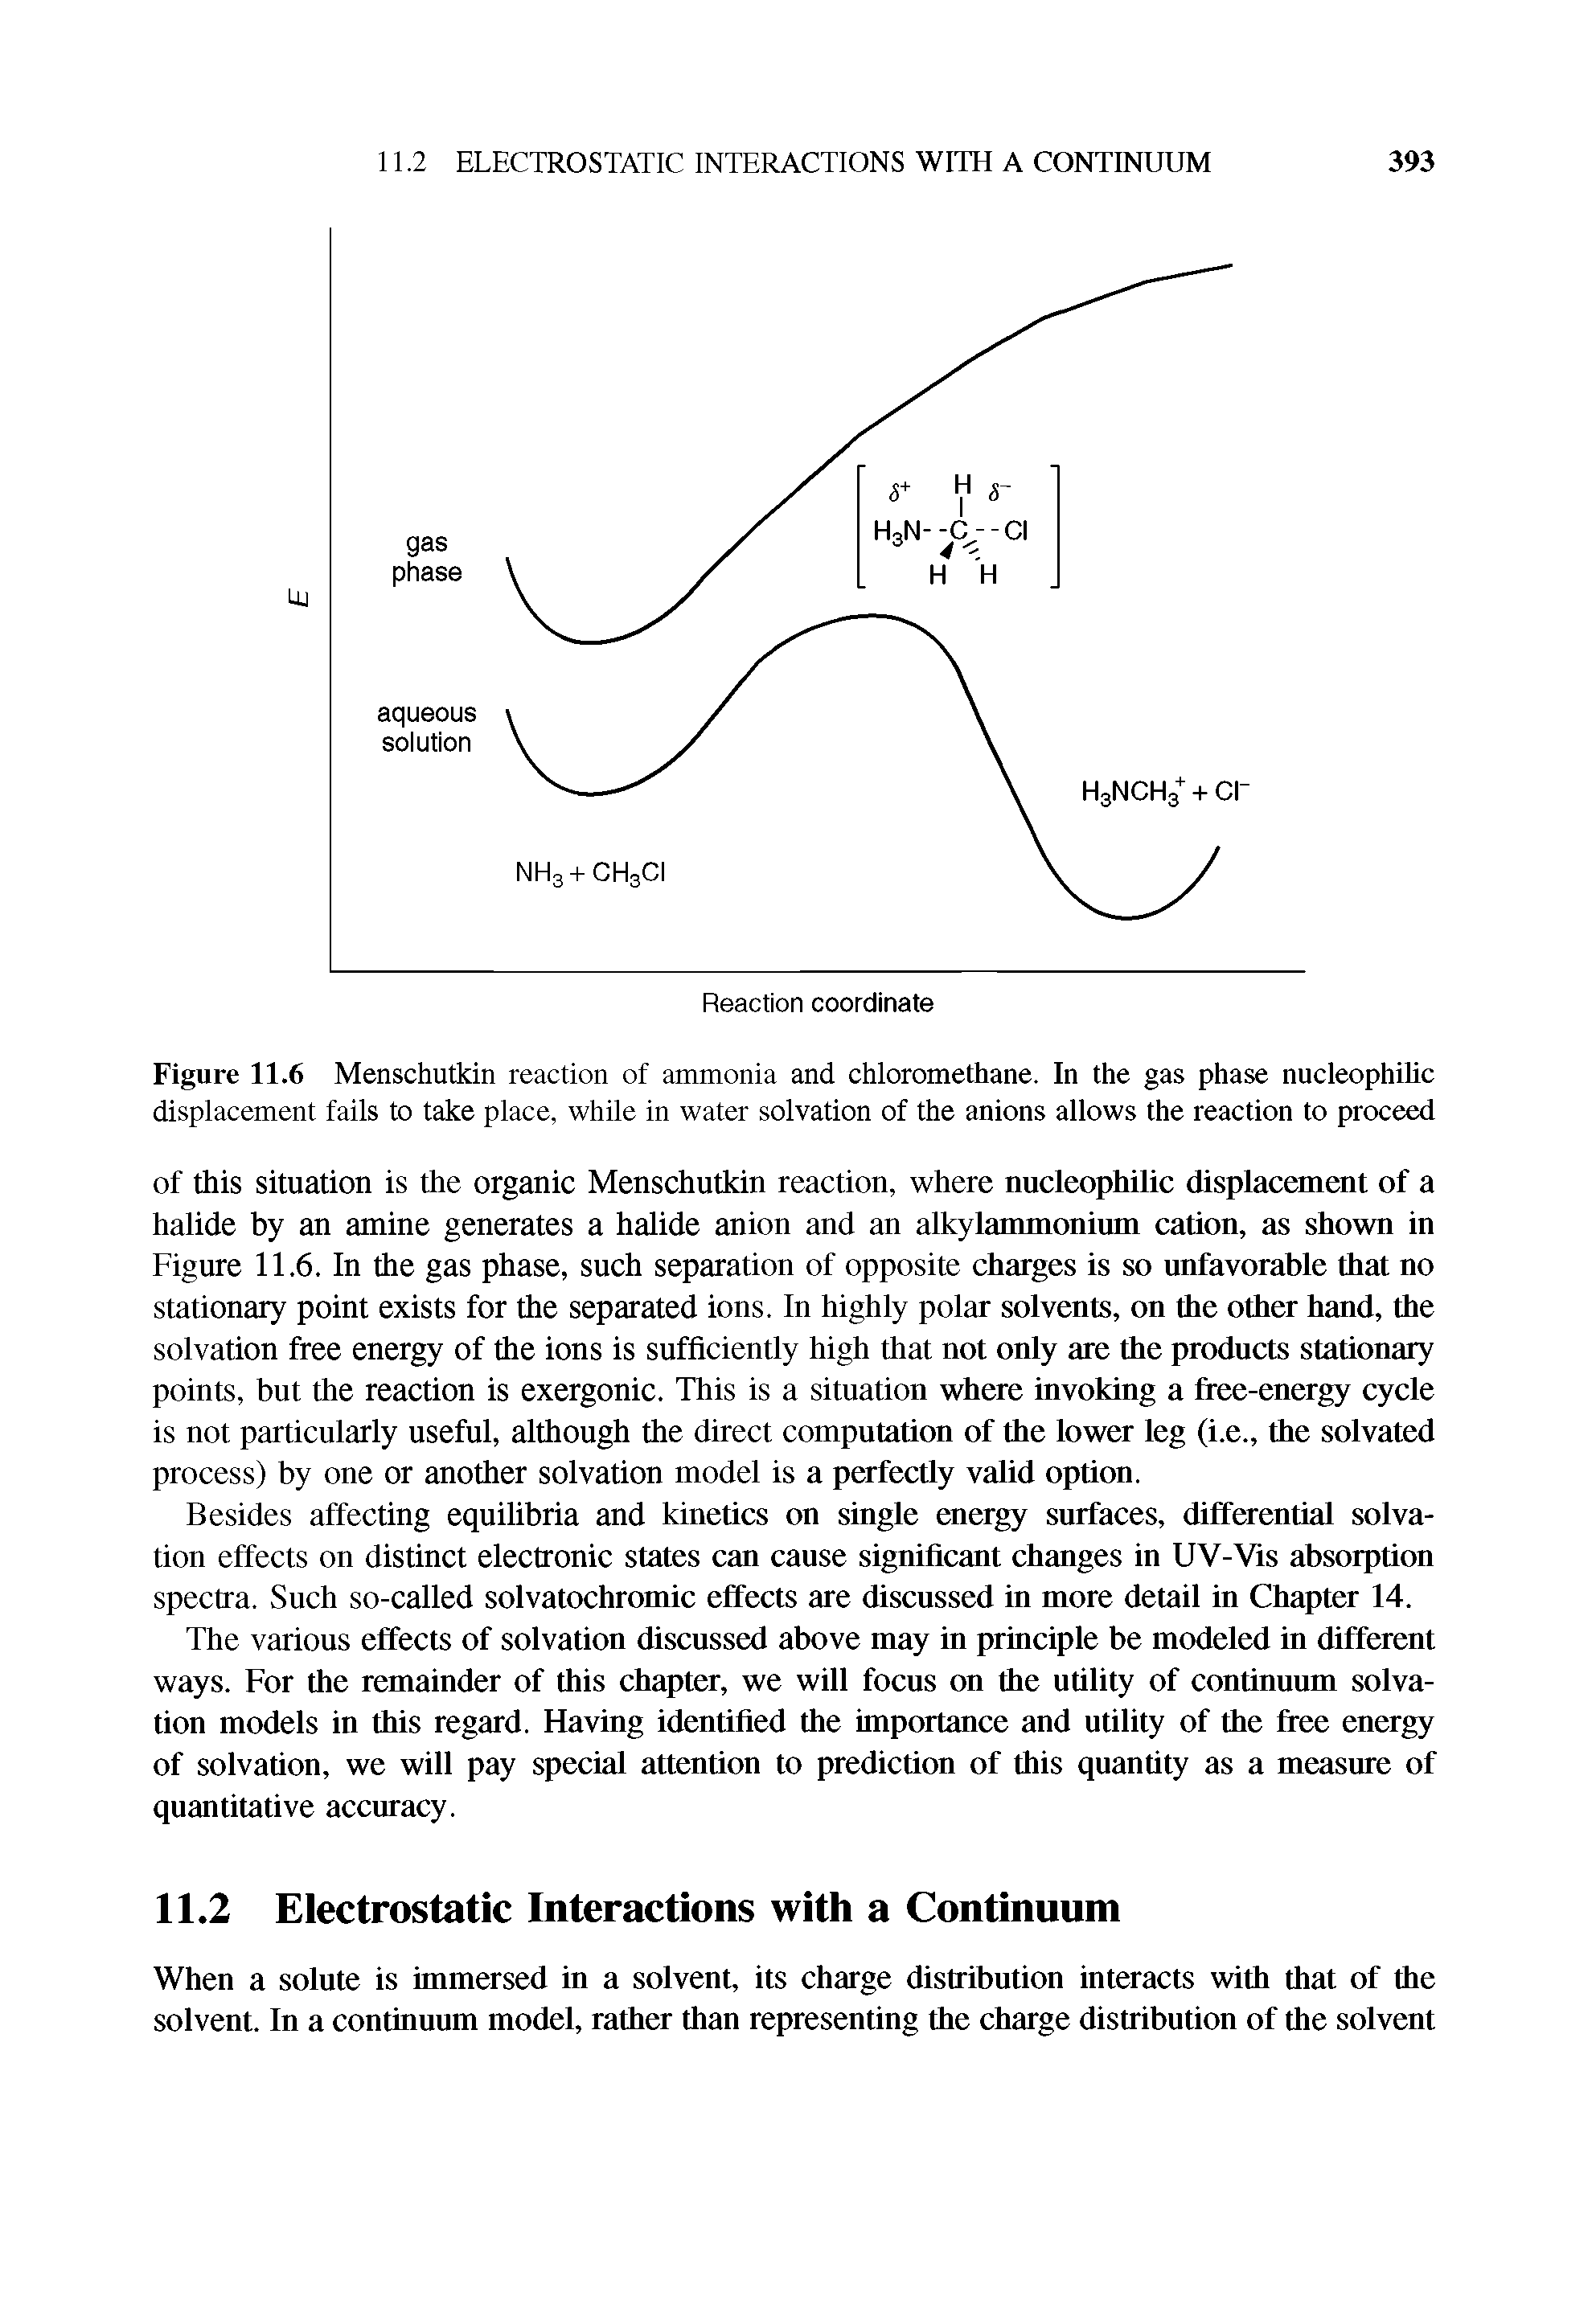 Figure 11.6 Menschutkin reaction of ammonia and chloromelhane. In the gas phase nucleophilic displacement fails to take place, while in water solvation of the anions allows the reaction to proceed...